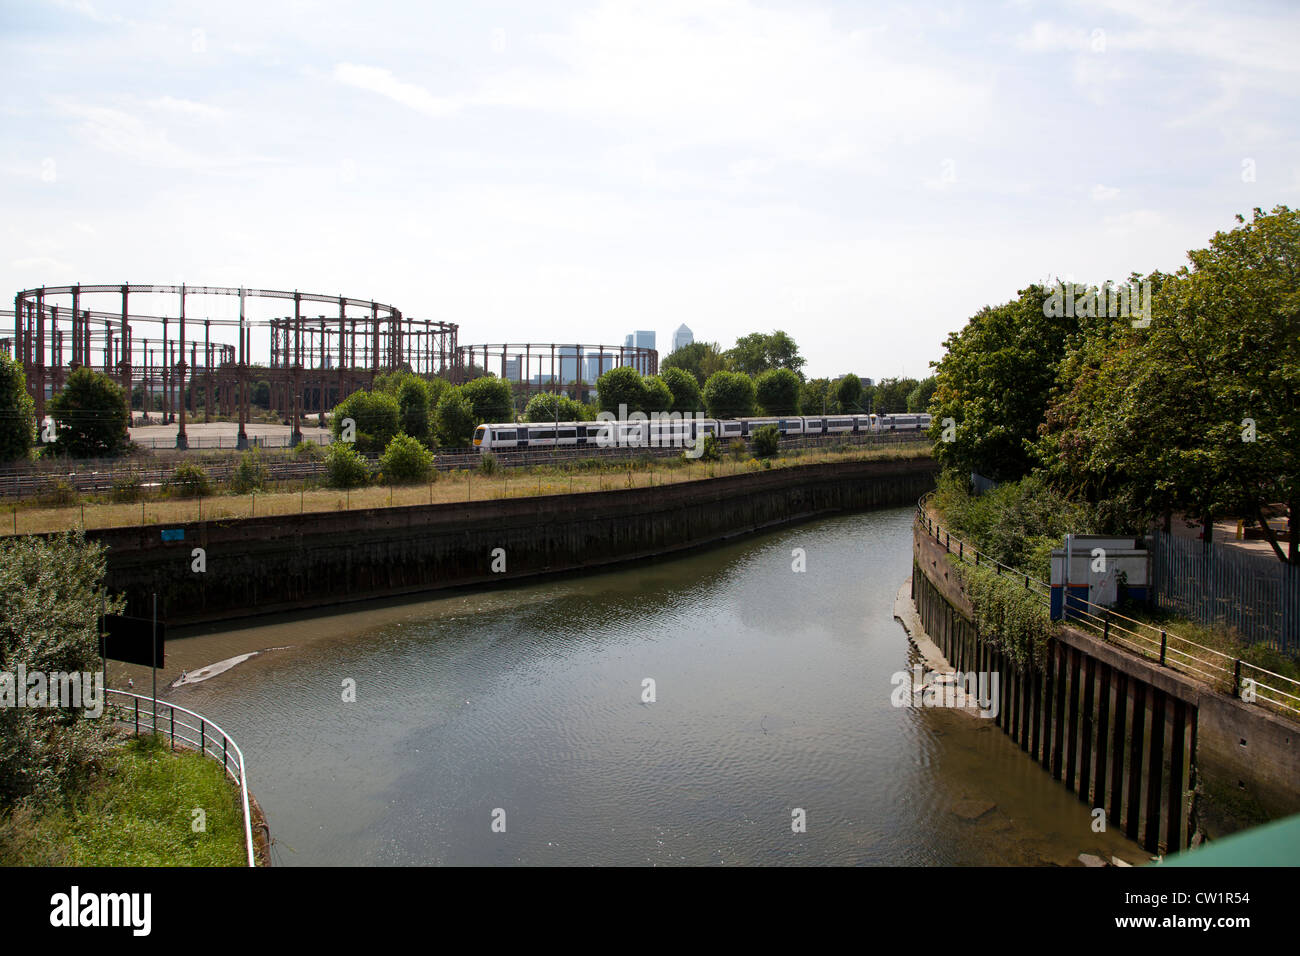 Tube train passing in front of Gasometer's near Bow Back Rivers, Stratford, London England, UK. Stock Photo